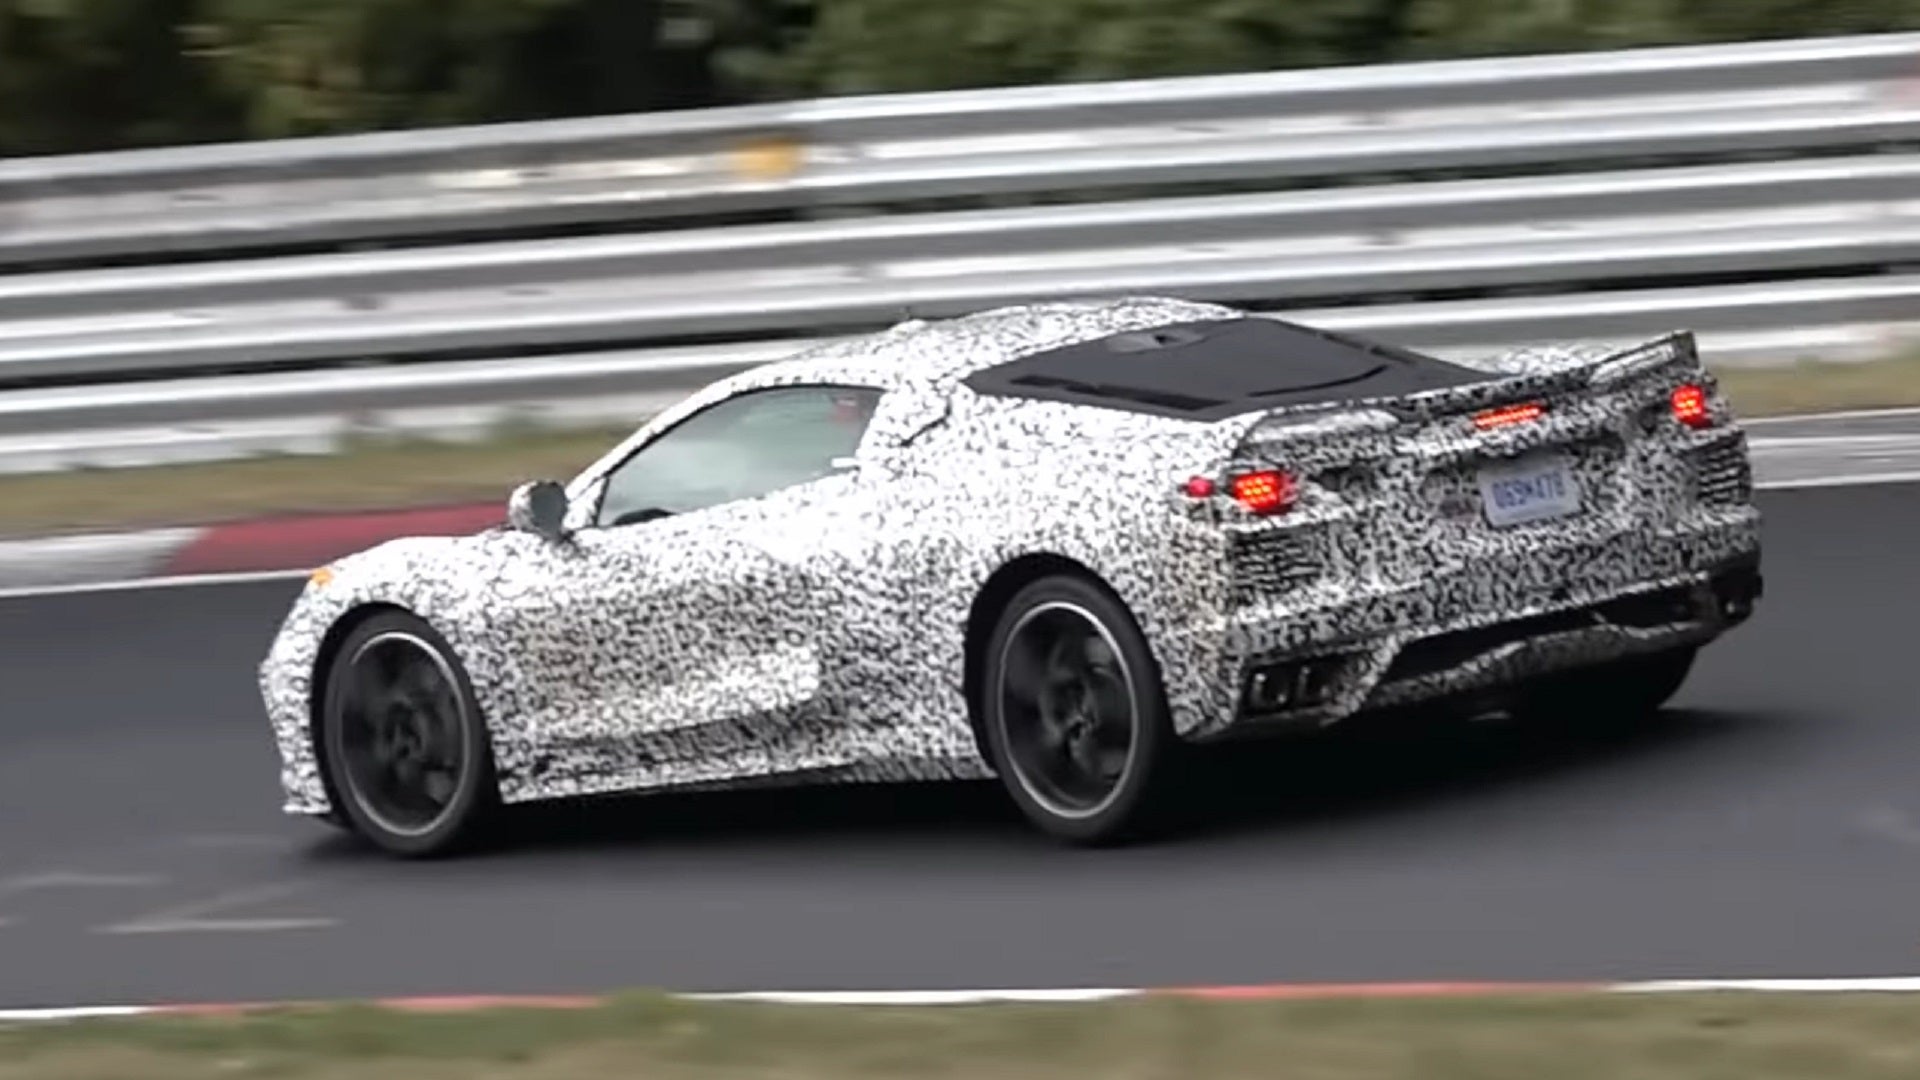 Mid-Engined C8 Chevrolet Corvette Delayed 6 Months Over Electrical Issue: Report